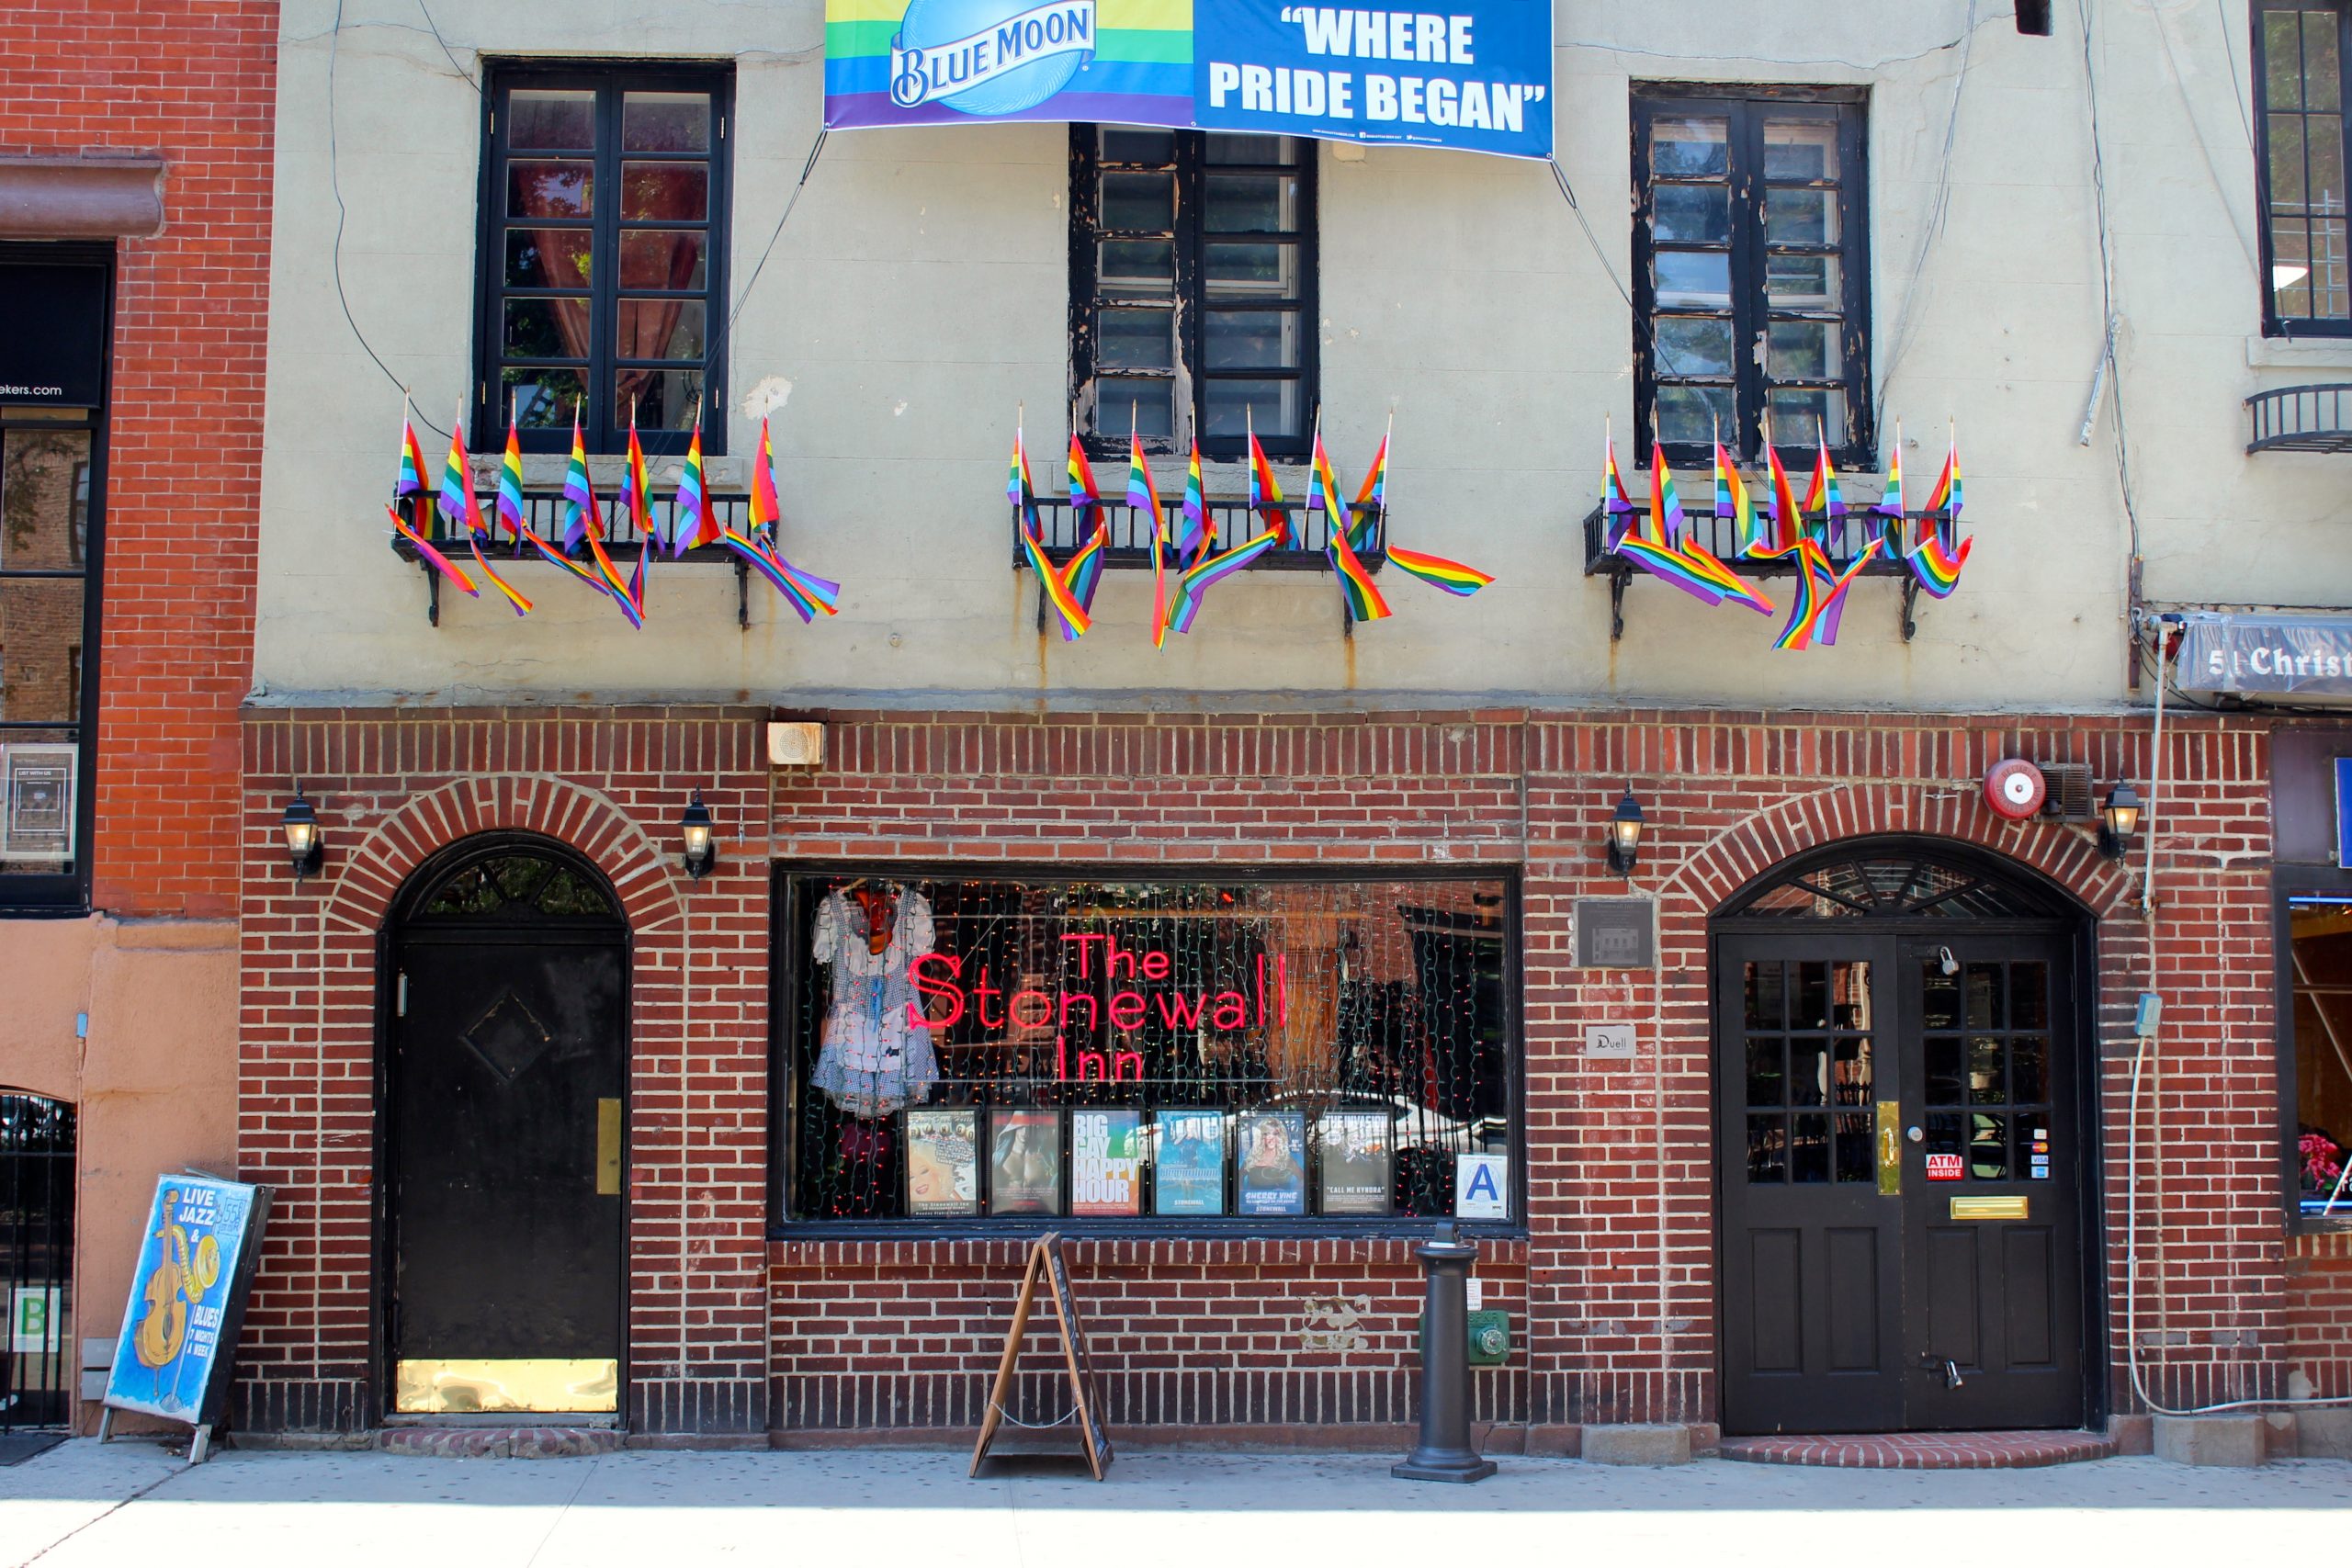 An image of The Stonewall Inn, a brick building in New York. There are pride flags hanging from the first floor windows